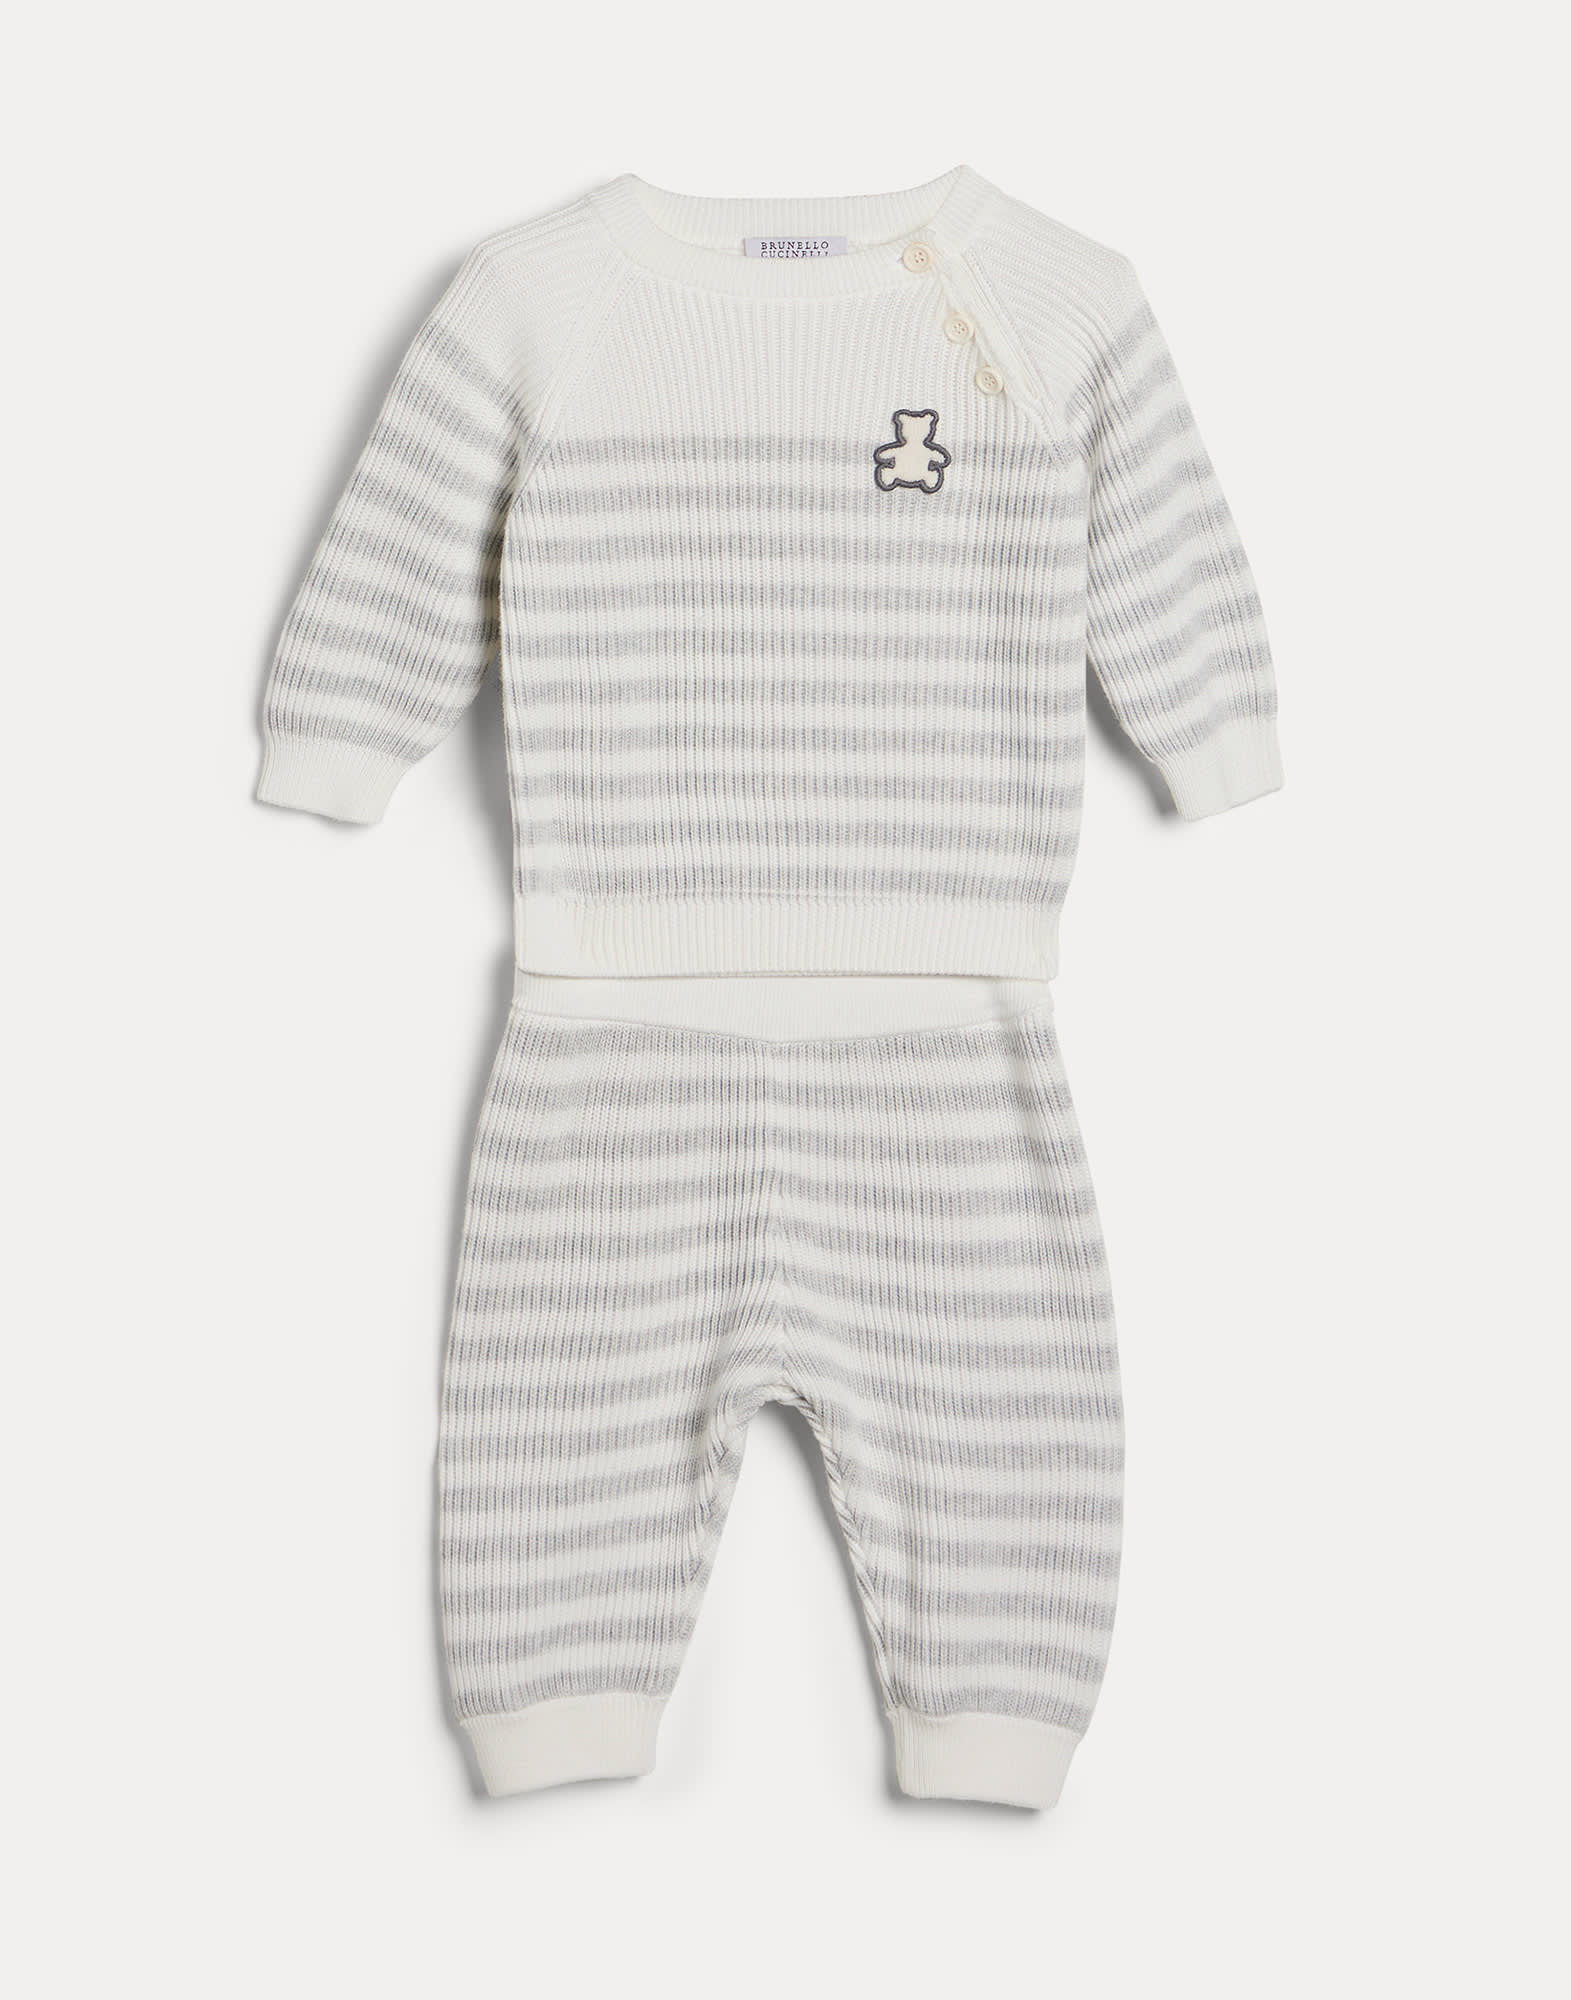 Baby striped coordinated set